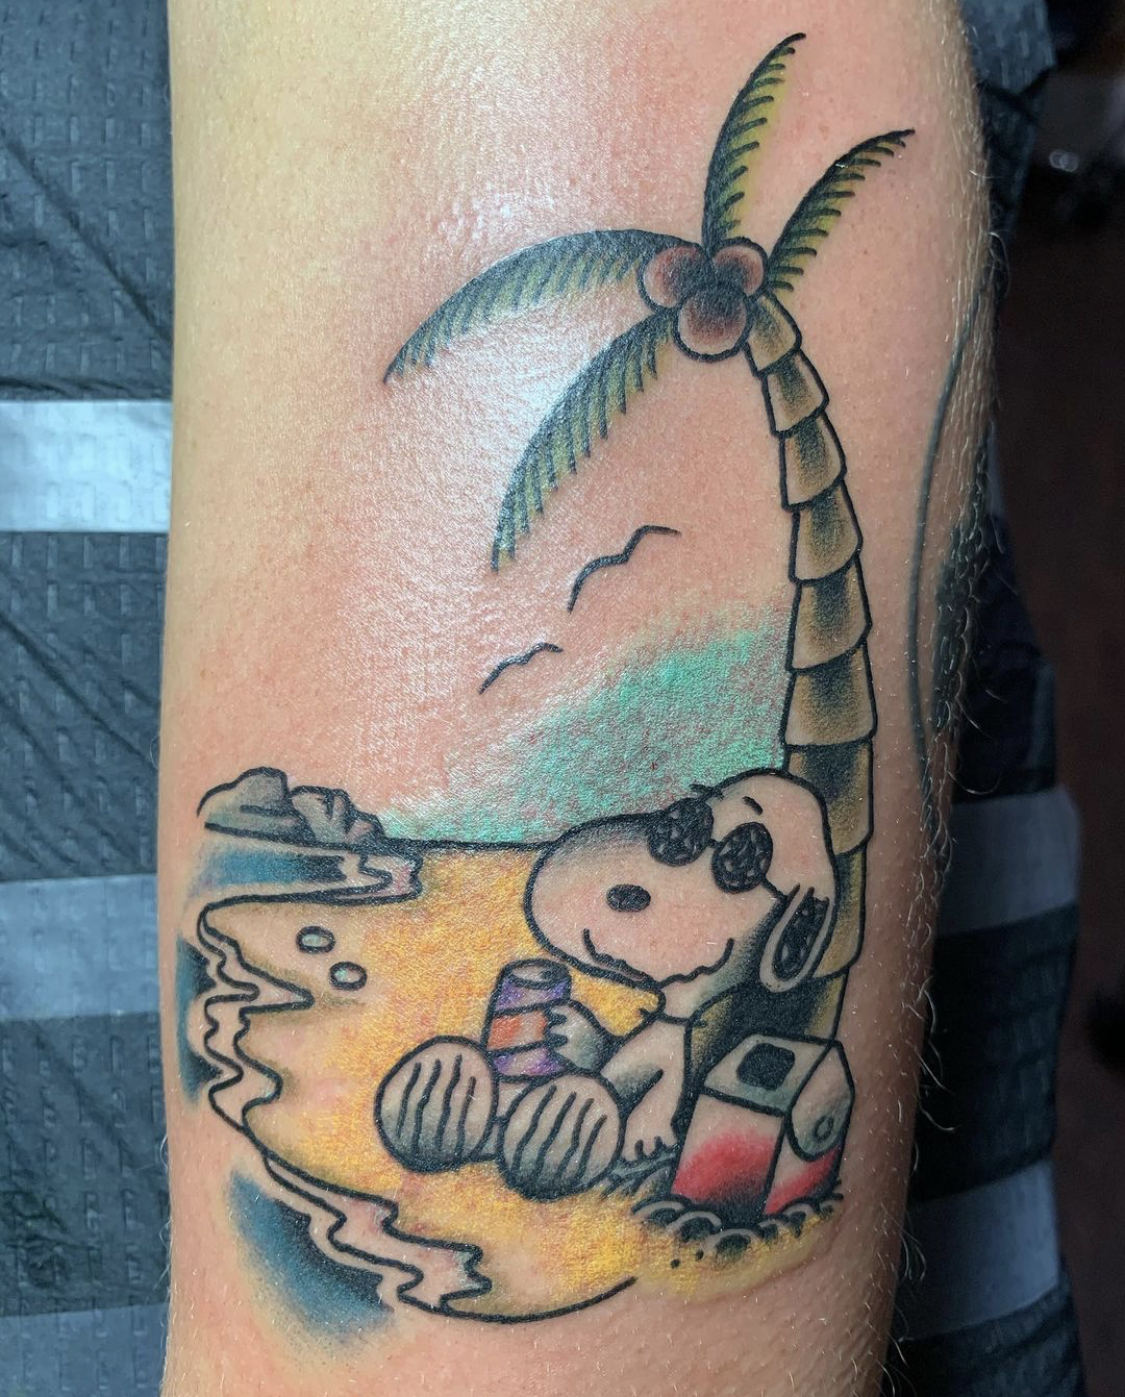 Snoopy smiles while holding a can and sitting against a palm tree on a beach.